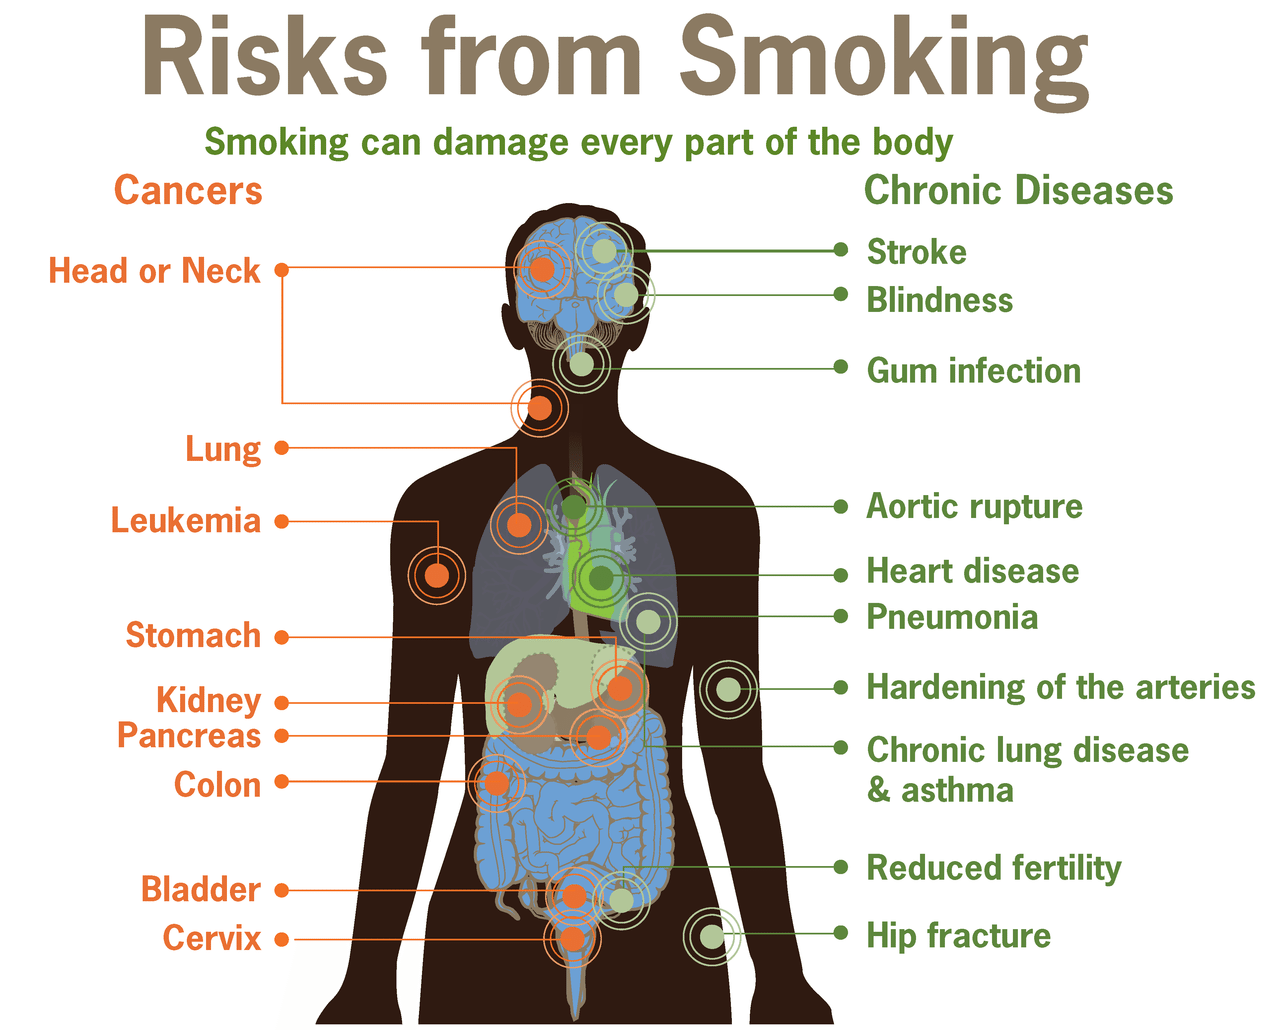 Risks from Smoking